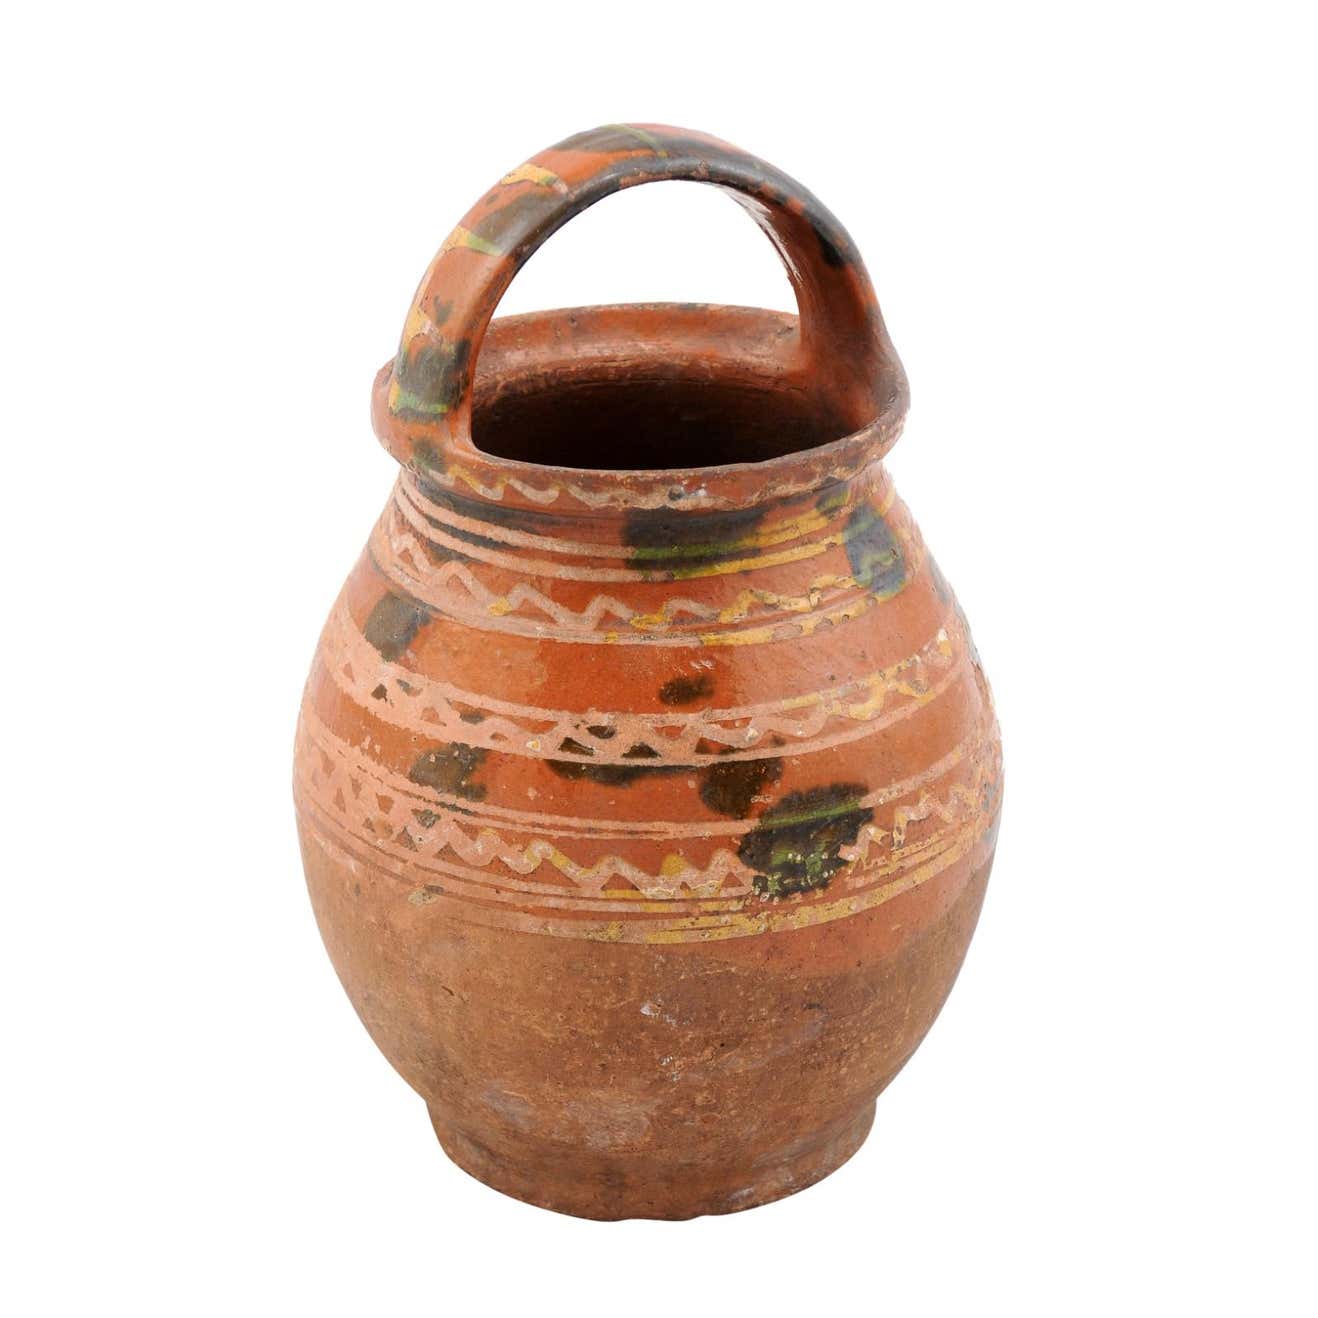 SOLD - Rustic French Late 19th Century Pottery Jug with Wavy Lines and Large Handle